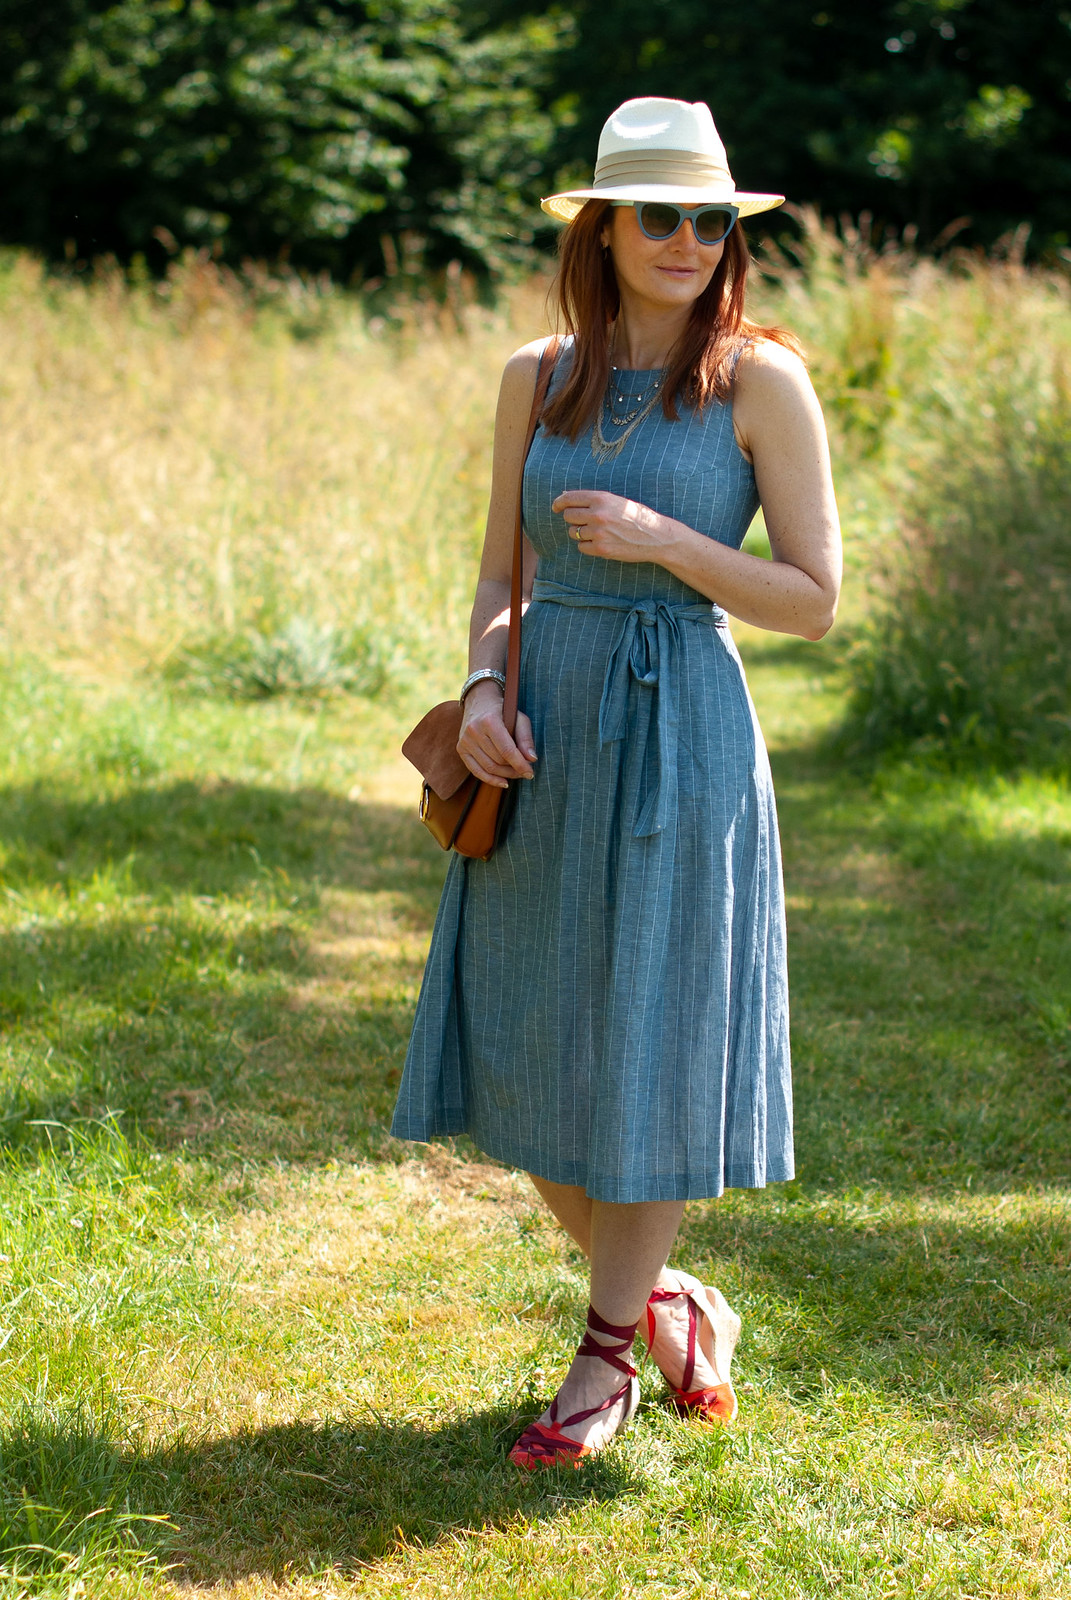 A Lightweight Chambray Dress Perfect for Summer \ styled with a cream Panama hat, tan crossbody bag, red wedge espadrilles and blue cat eye sunglasses | Not Dressed As Lamb, over 40 fashion